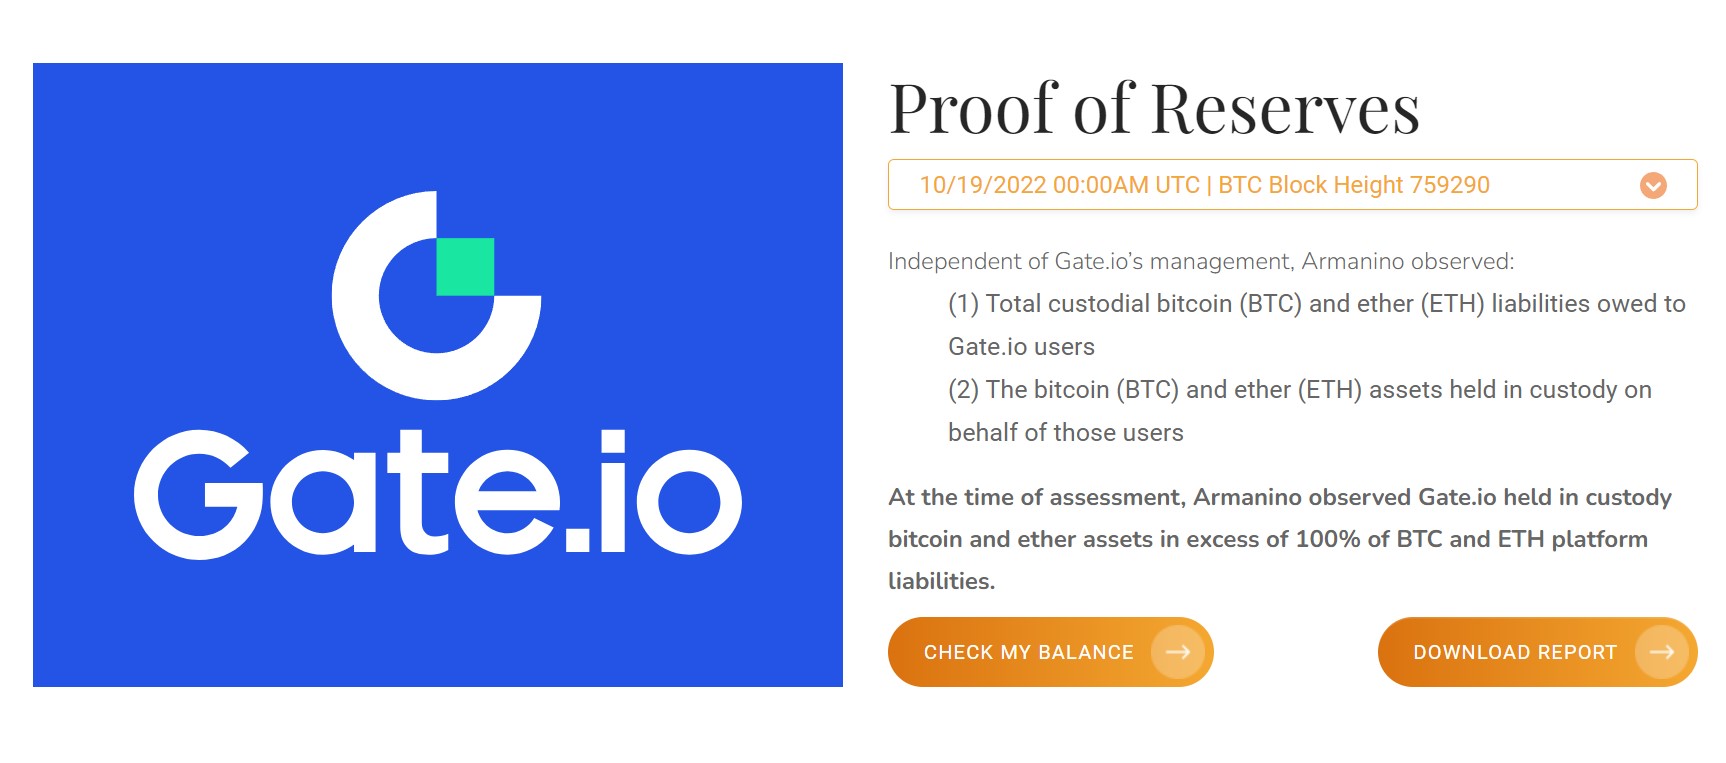 Gate.io Proof of Reserve